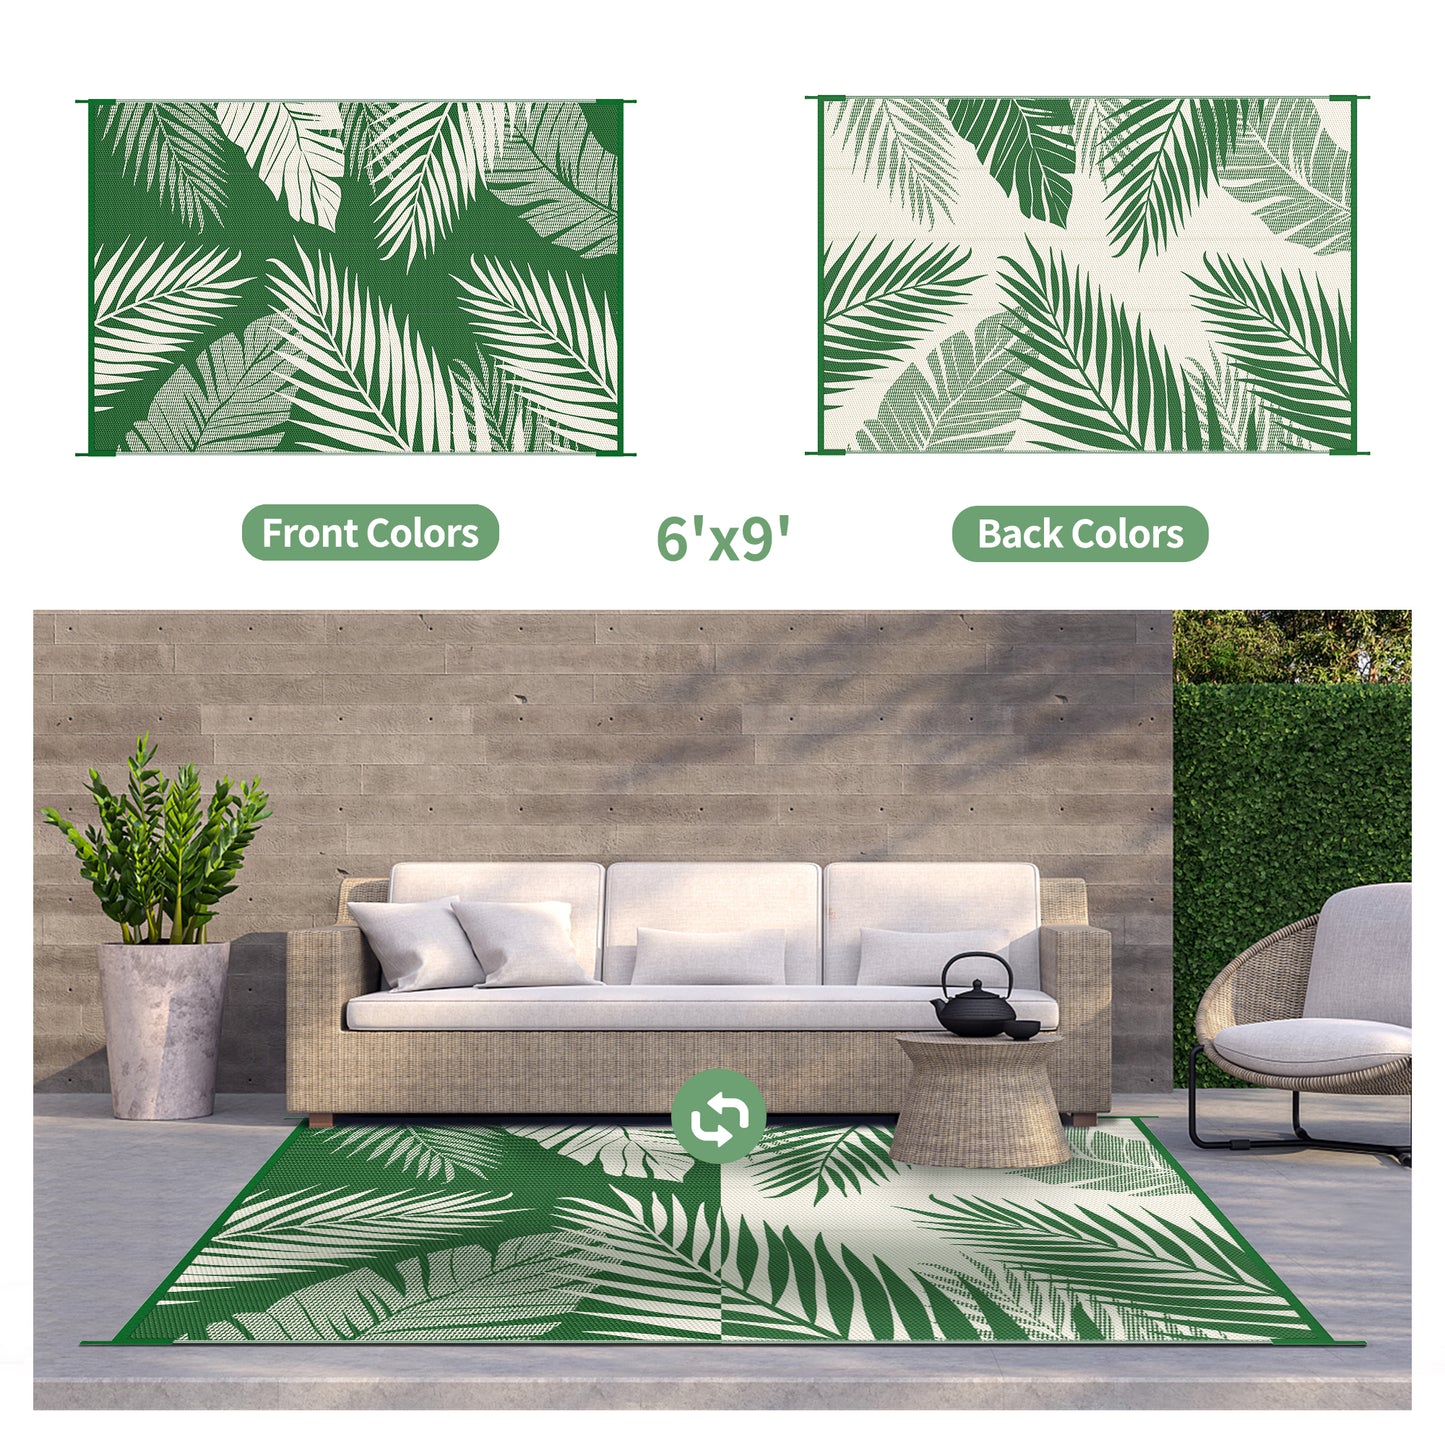 GENIMO Outdoor Rug Waterproof for Patios Clearance, Reversible Outdoor Plastic Straw Camping Rug Carpet, Large Area Rugs Mats for RV, Picnic, Backyard, Deck, Balcony, Porch